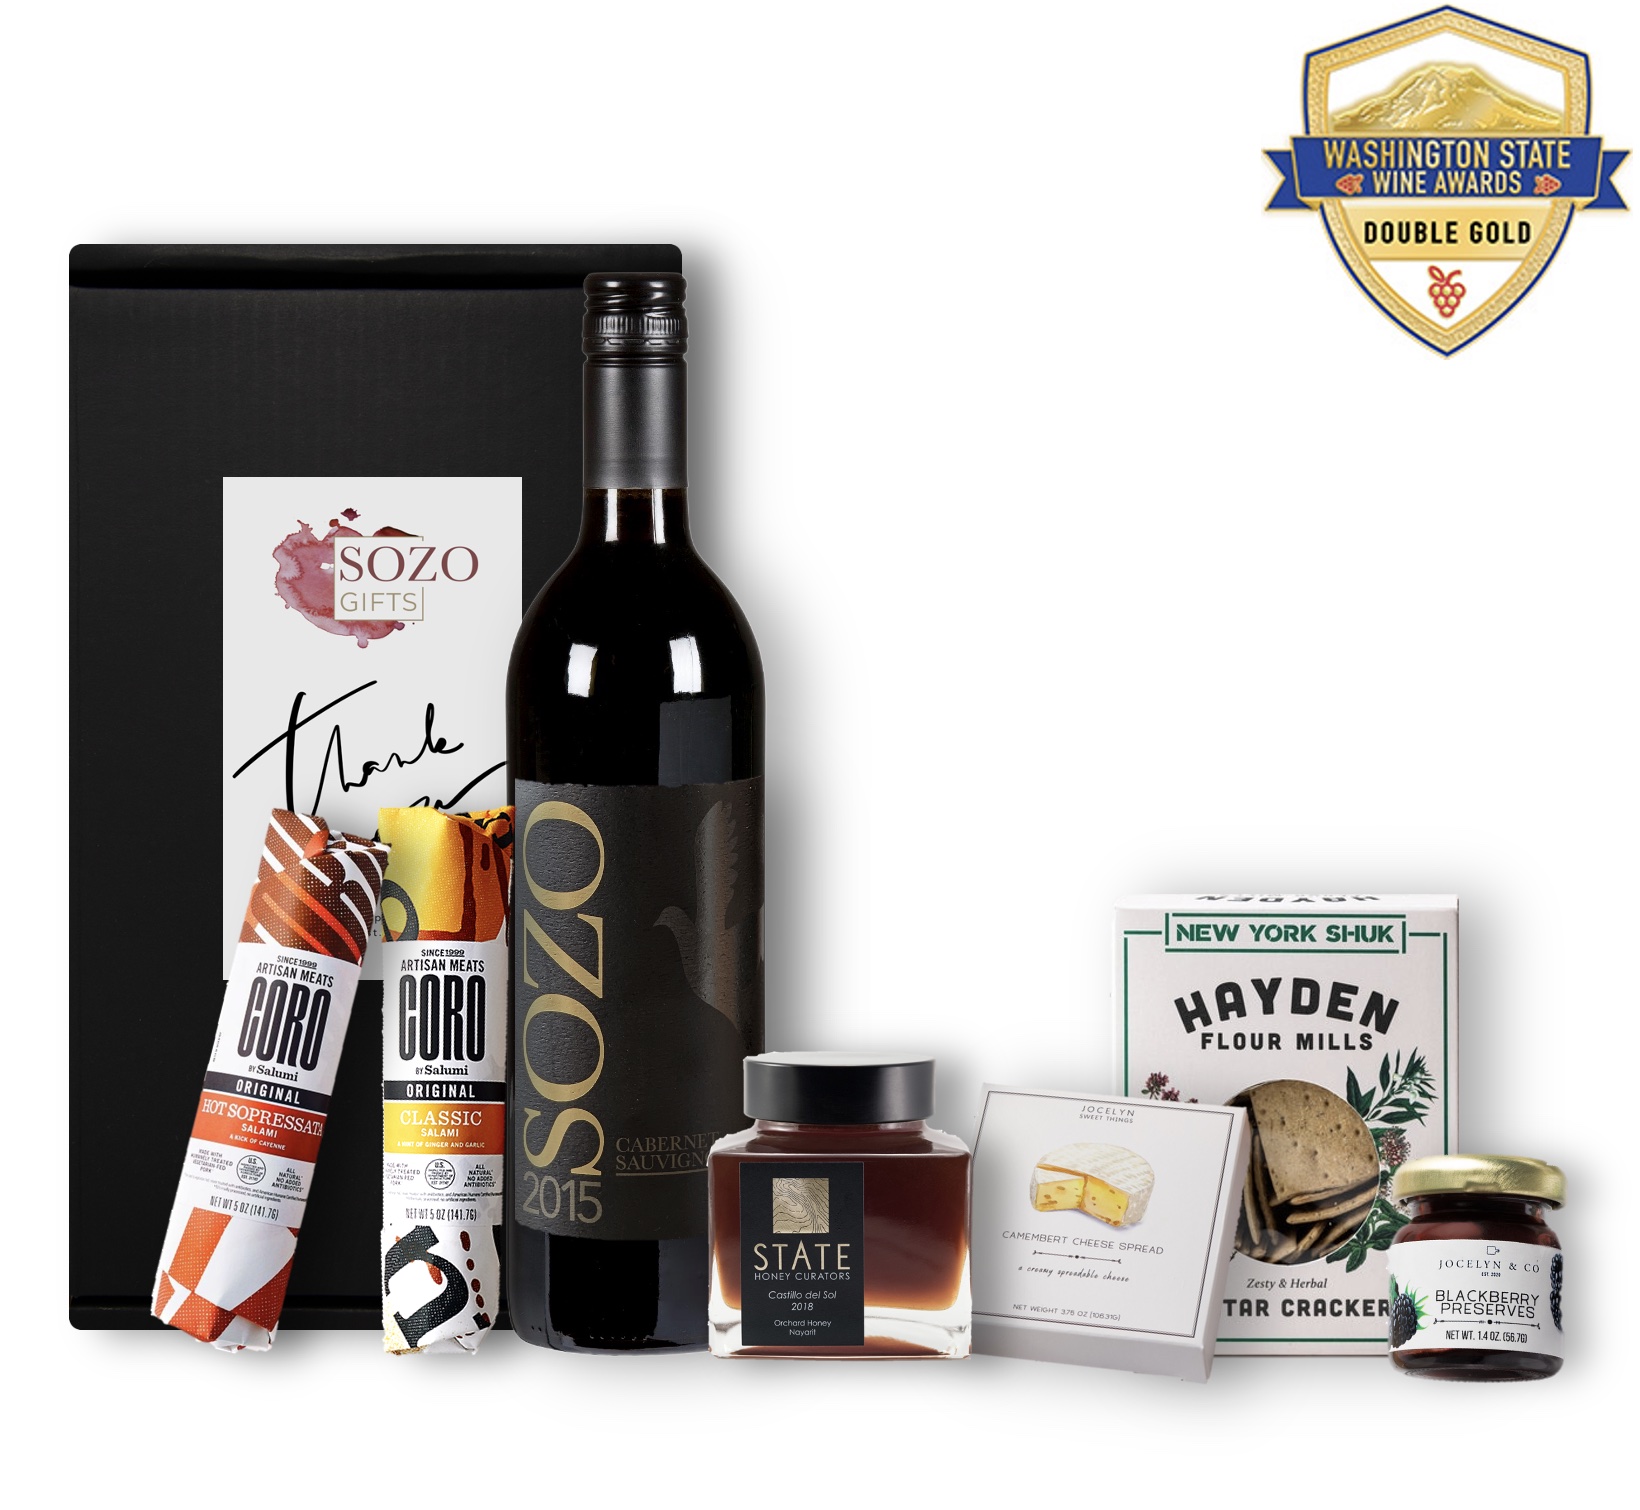 https://cdn11.bigcommerce.com/s-kgihy4hax9/images/stencil/original/products/317/1018/Sozo_Gifts_2015_Cabernet_Salami_Duo_Cheese_Honey_Preserves_Crackers_Gift_Box__88336.1665186379.jpg